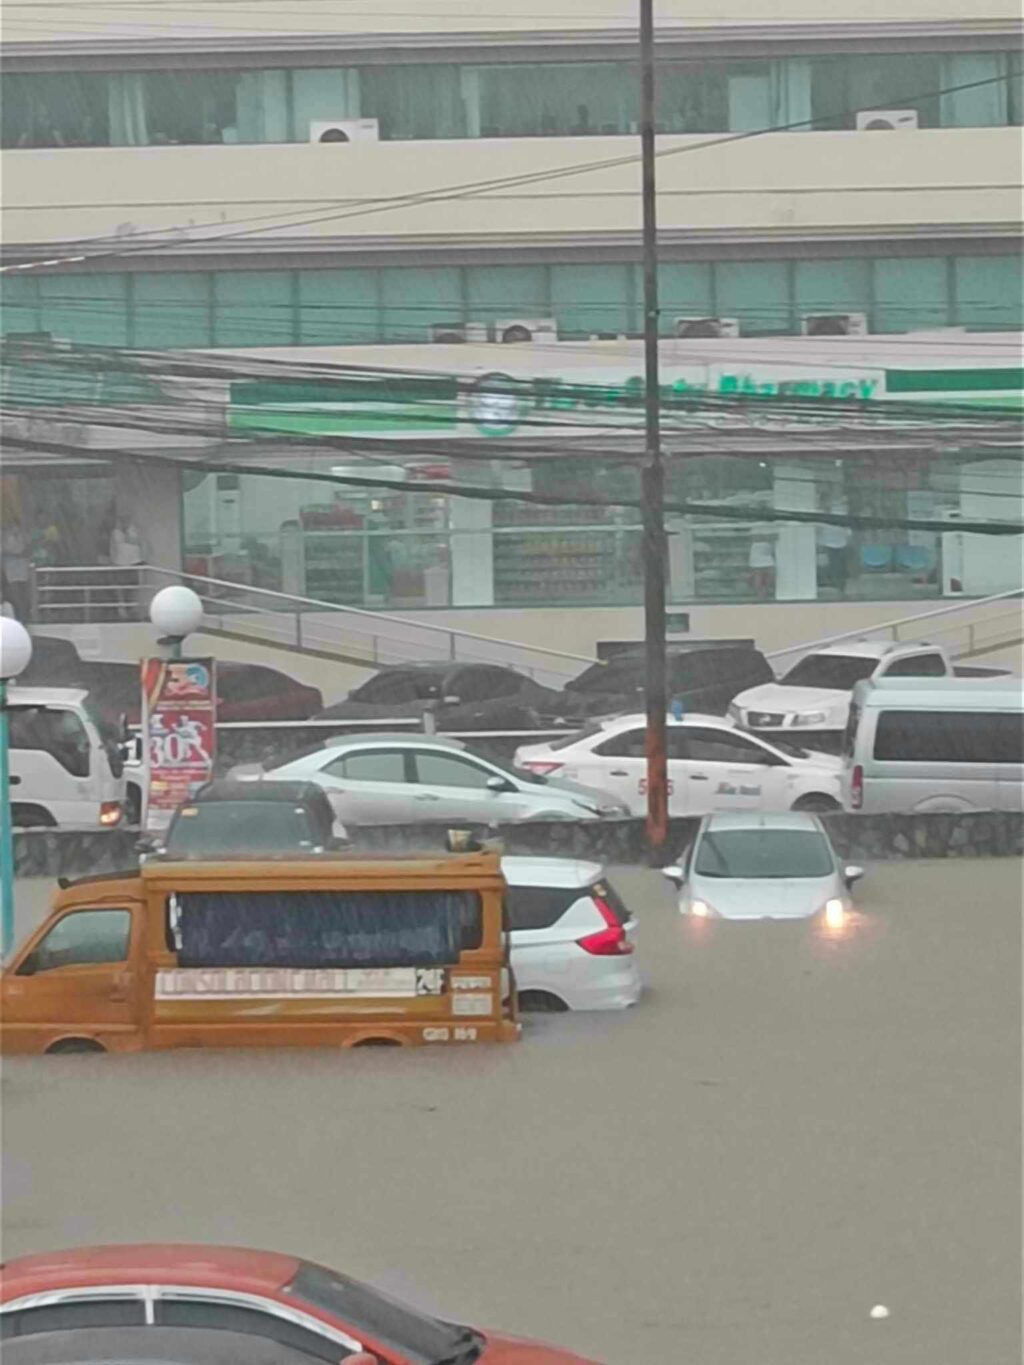 Some vehicles are half submerged in flood waters in a parking lot of an establishment in Barangay Banilad, Cebu City after the heavy rains this afternoon, September 11. | Contributed photo via Paul Lauro